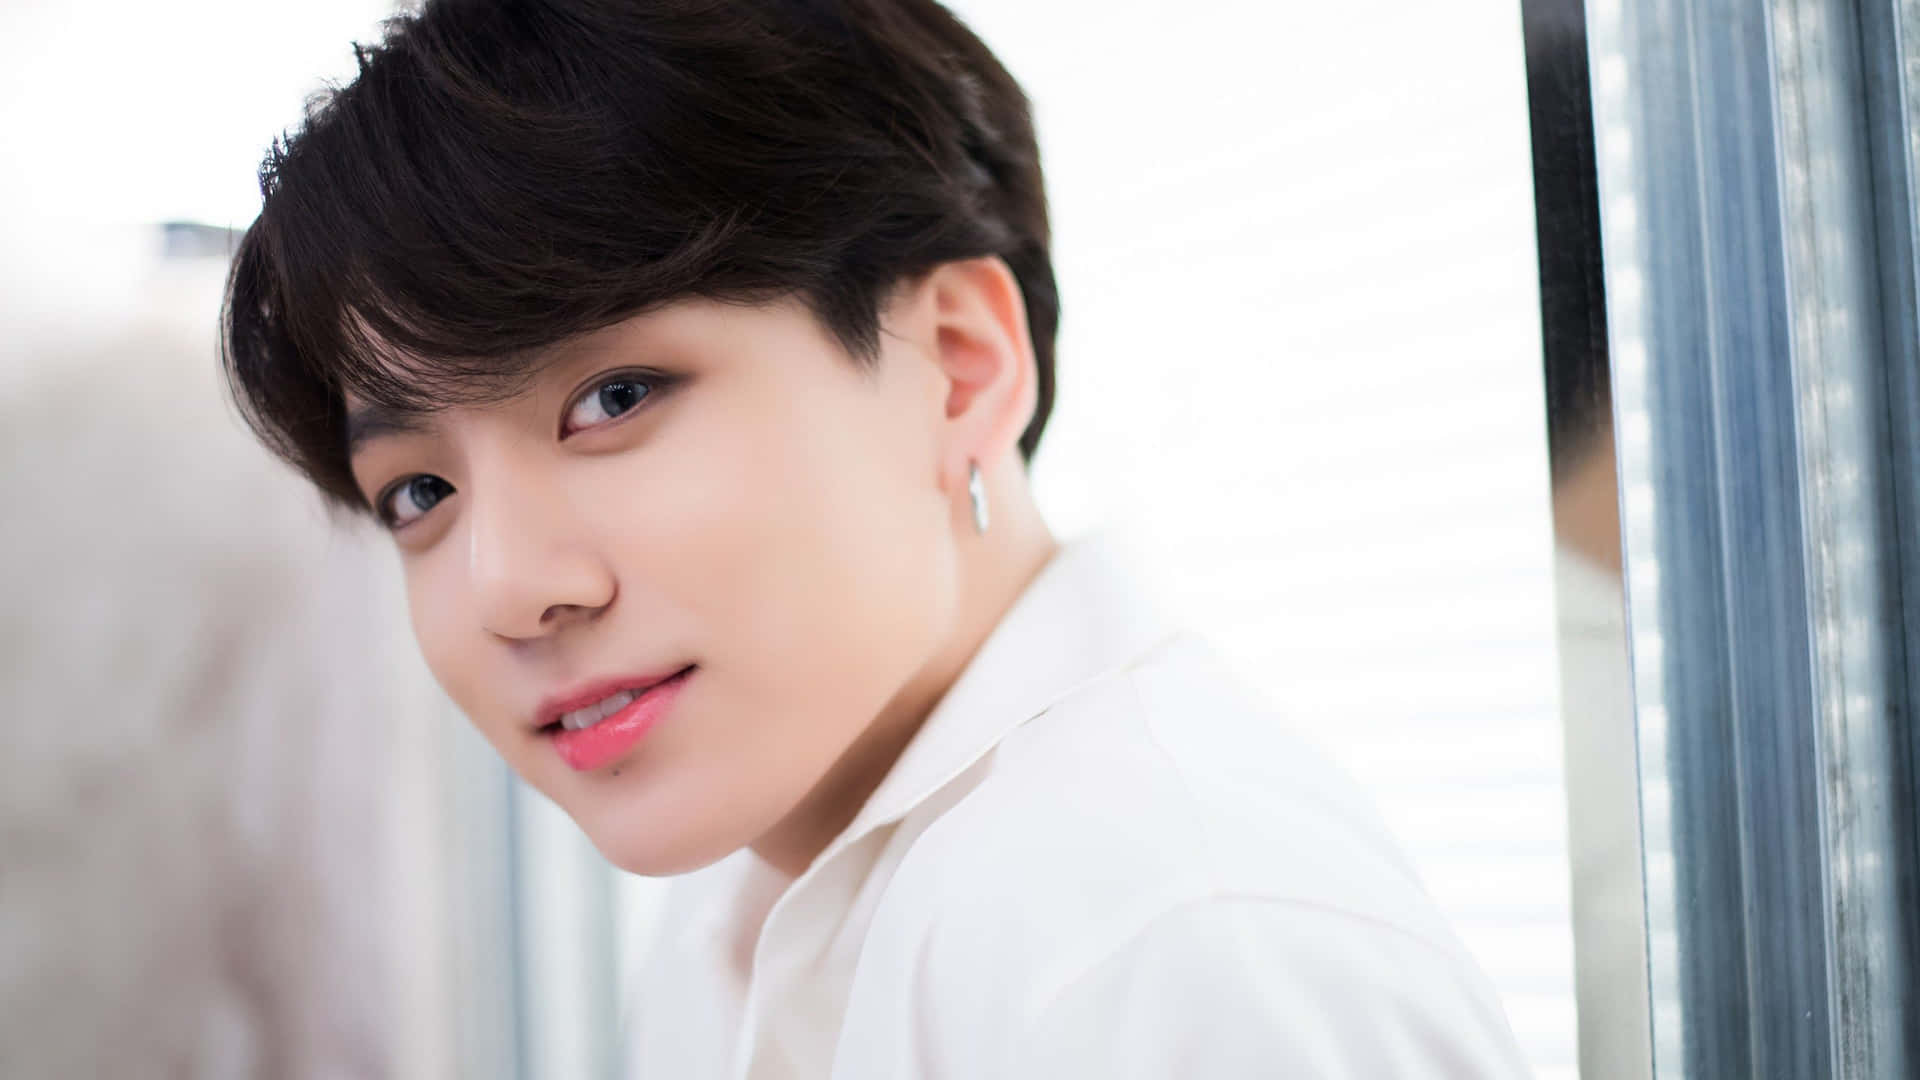 BTS’s Jungkook is ready to take K-pop fame by storm